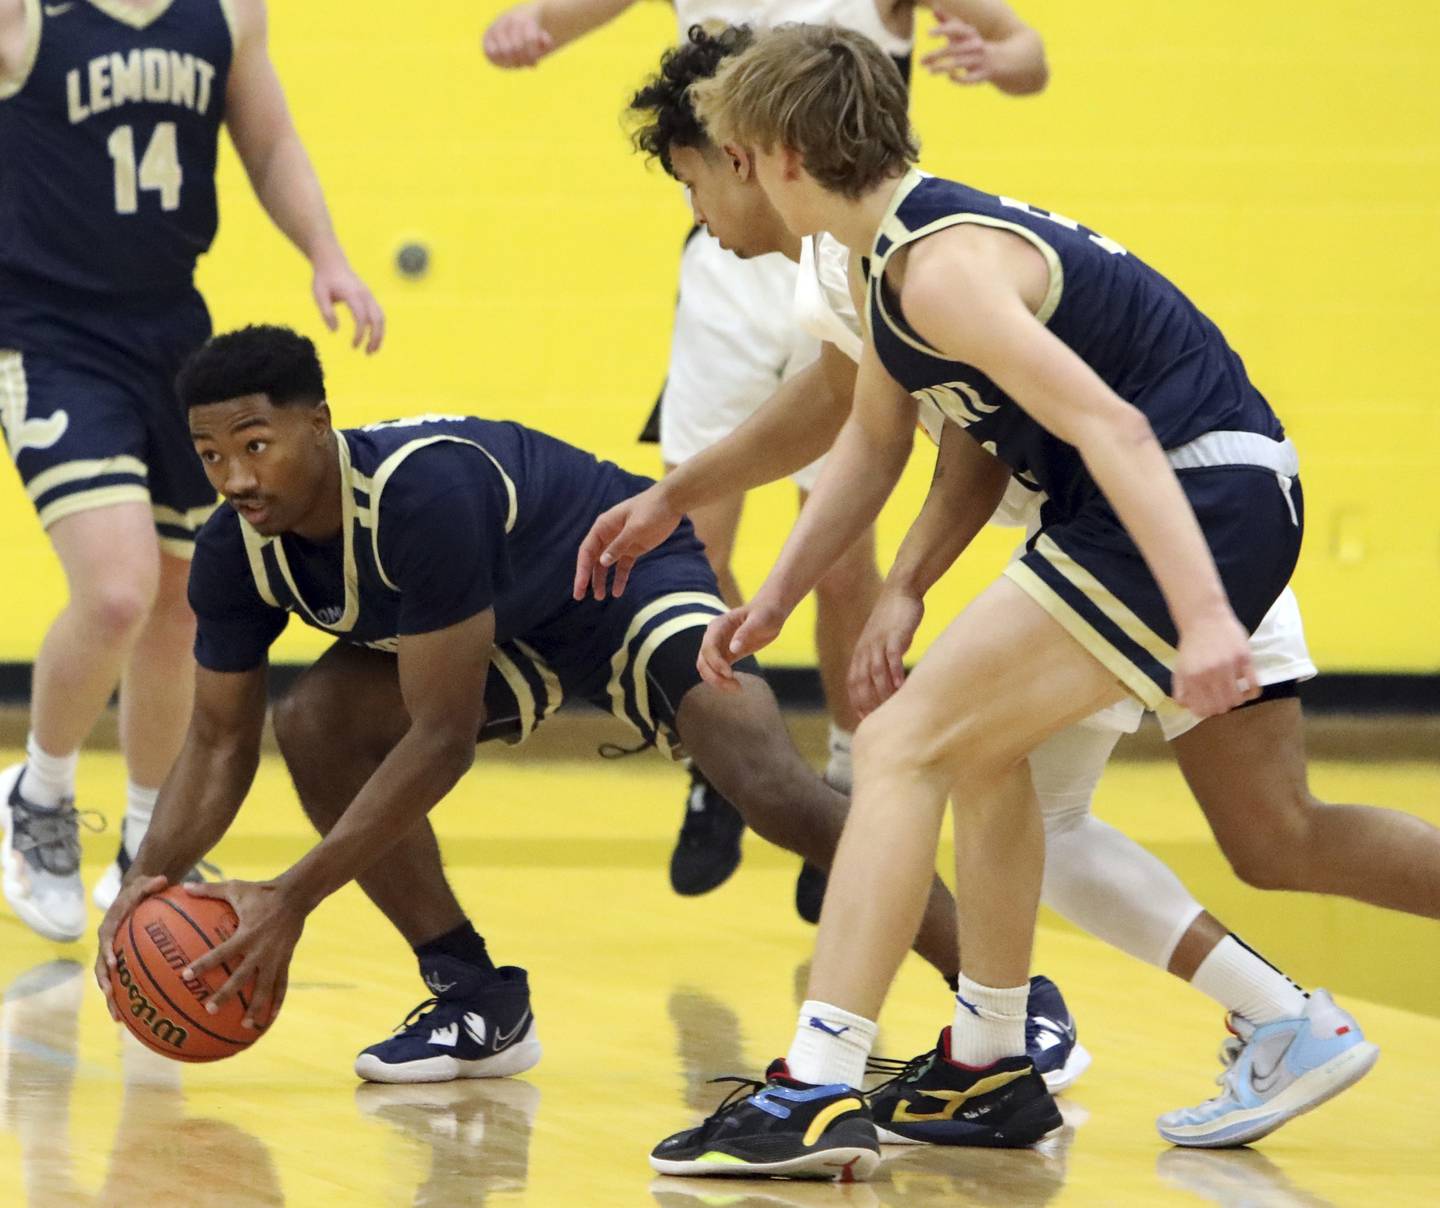 Lemont's Miles Beachum grabs a loose ball against Richards during a South Suburban Conference crossover in Oak Lawn on Tuesday, Dec. 6, 2022.